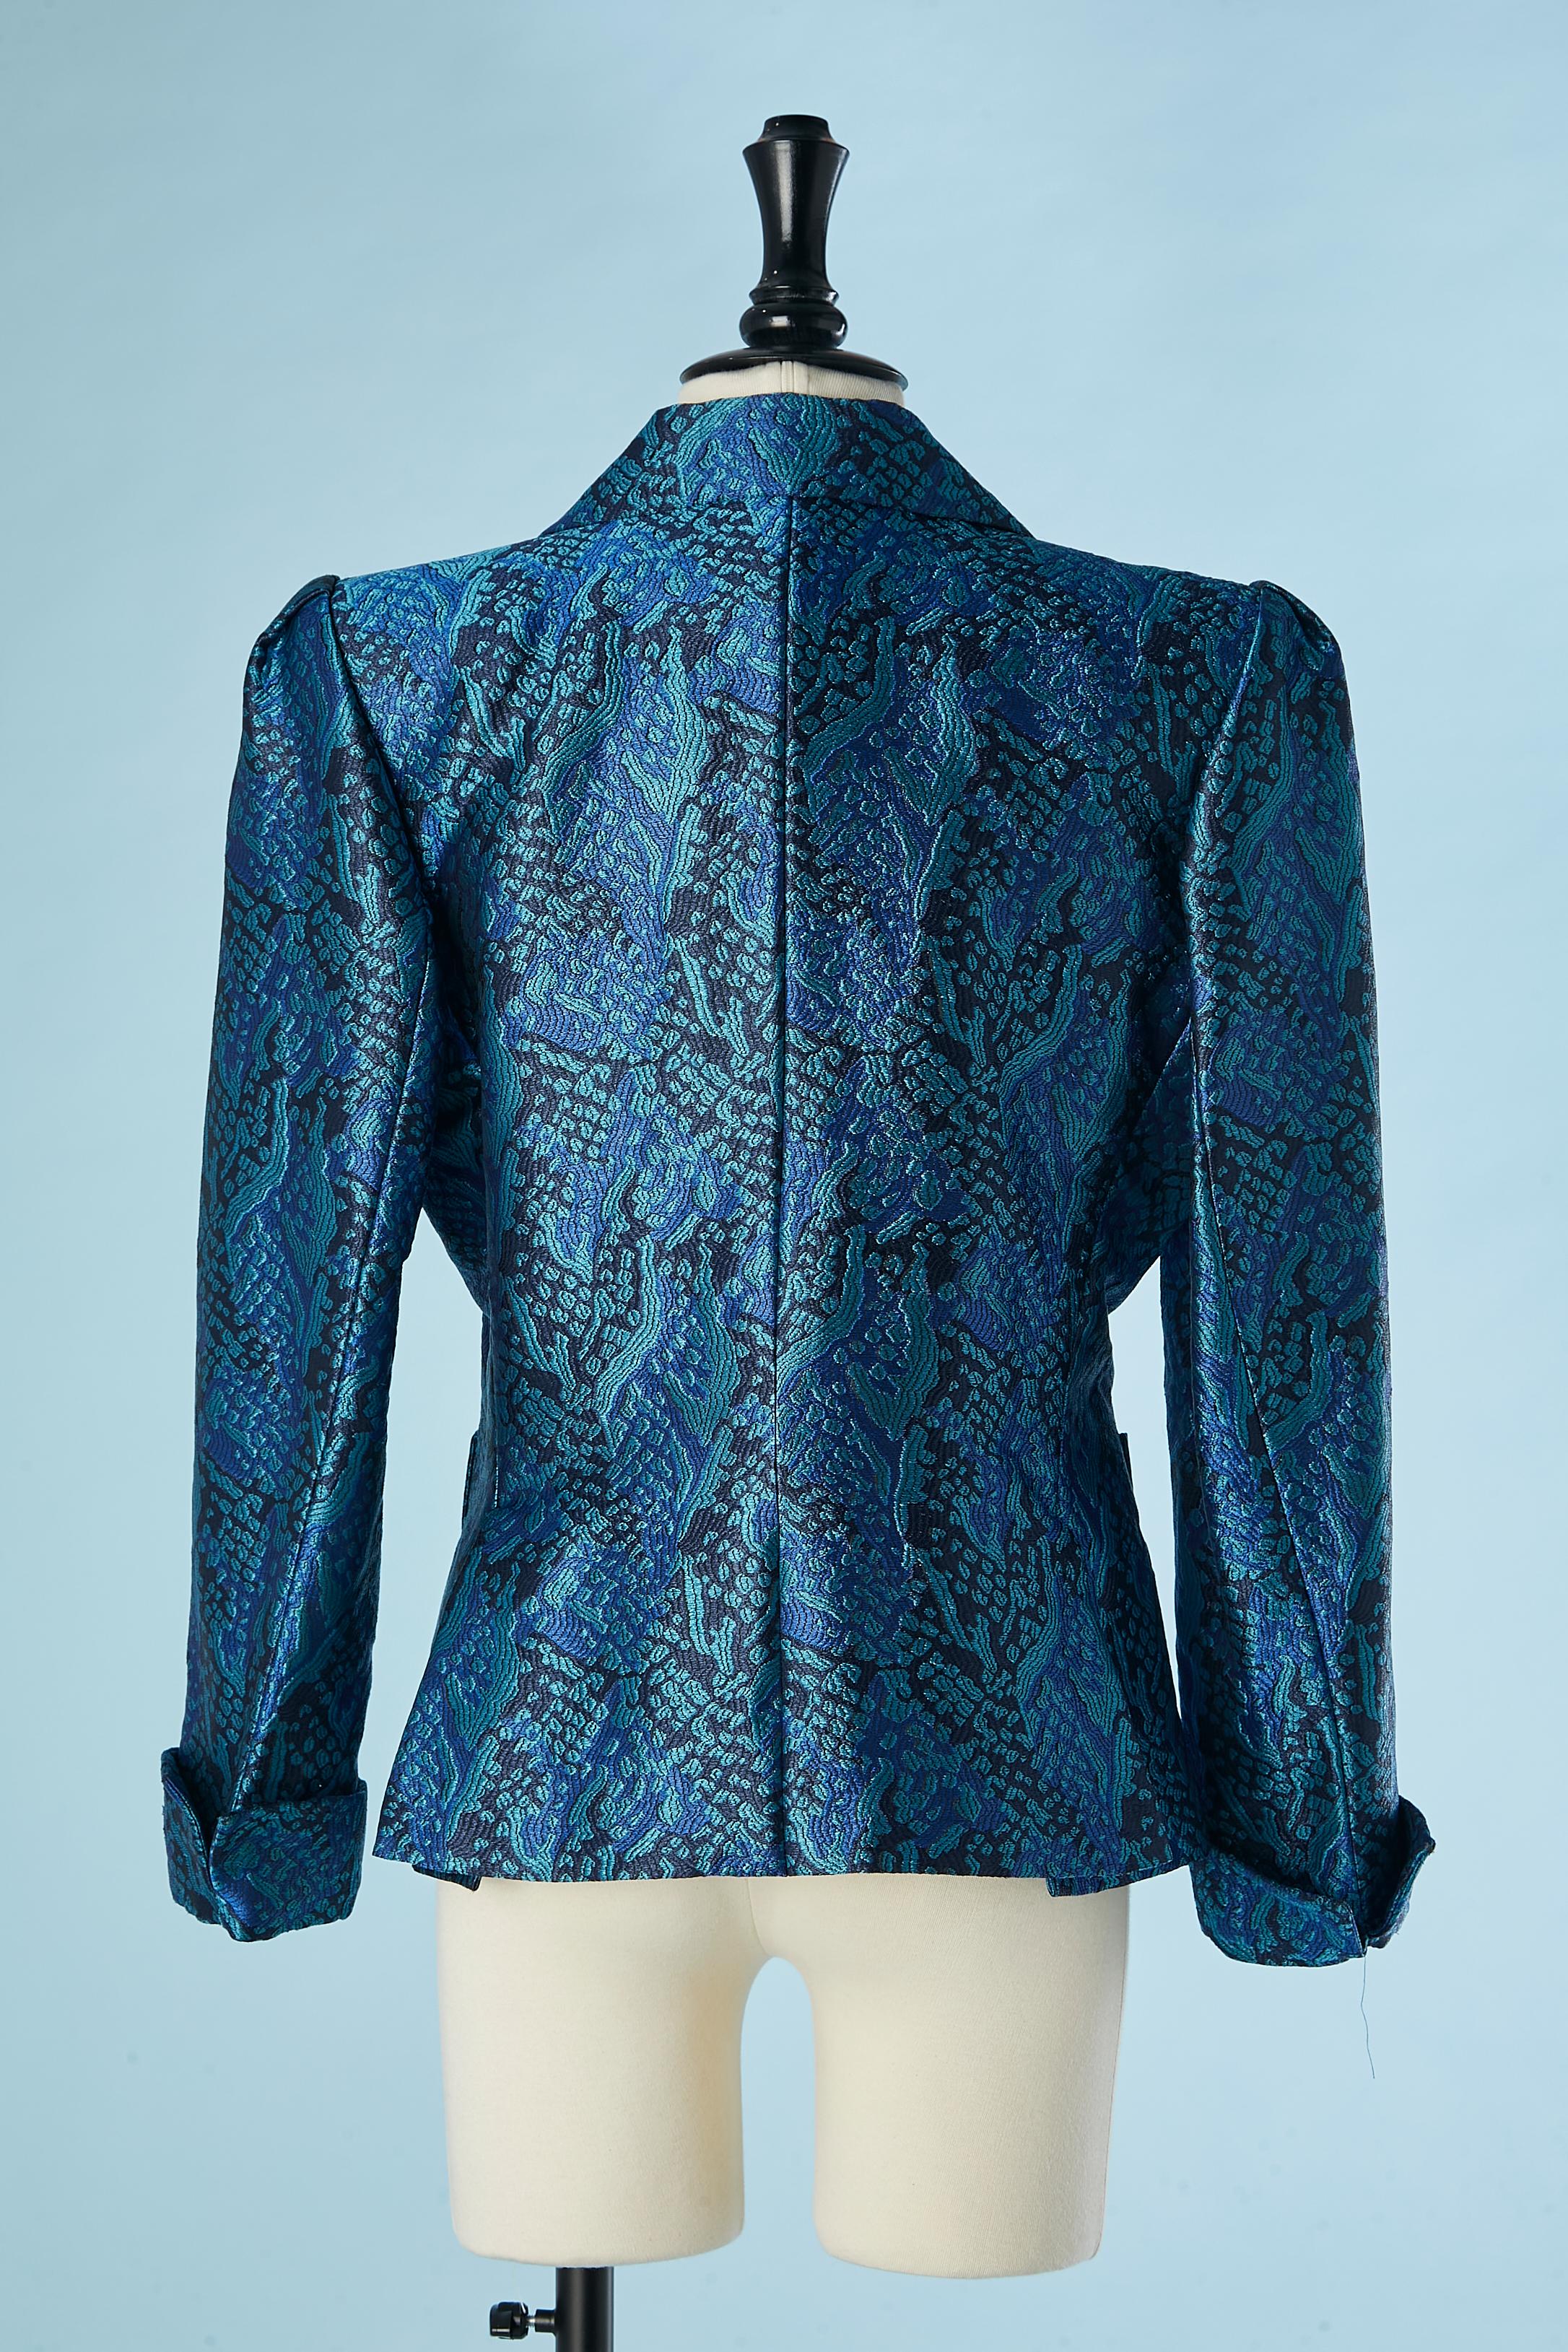 Blue damask single breasted evening jacket Yves Saint Laurent Rive Gauche  For Sale 1